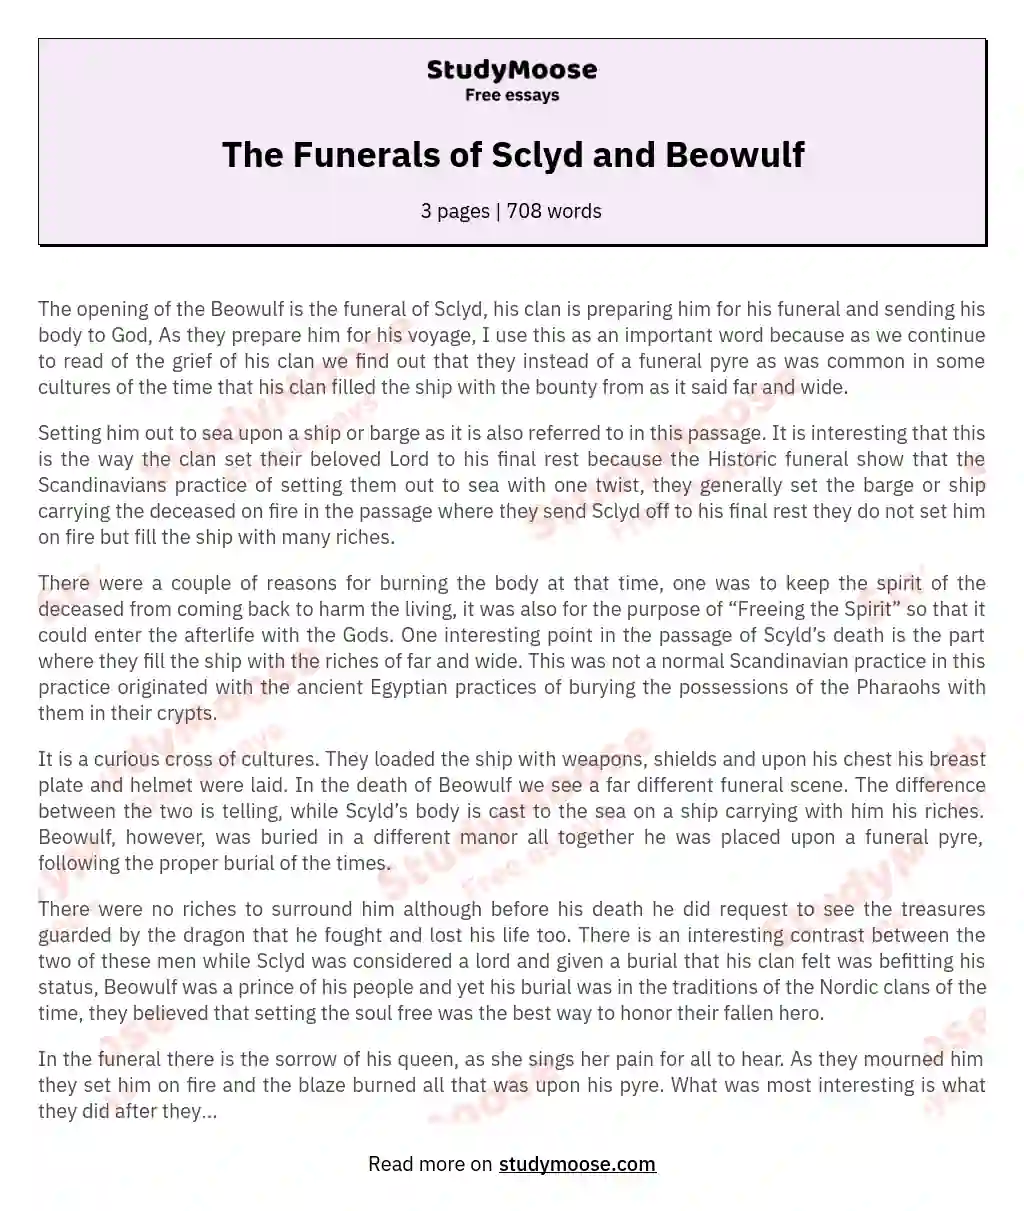 The Funerals of Sclyd and Beowulf essay